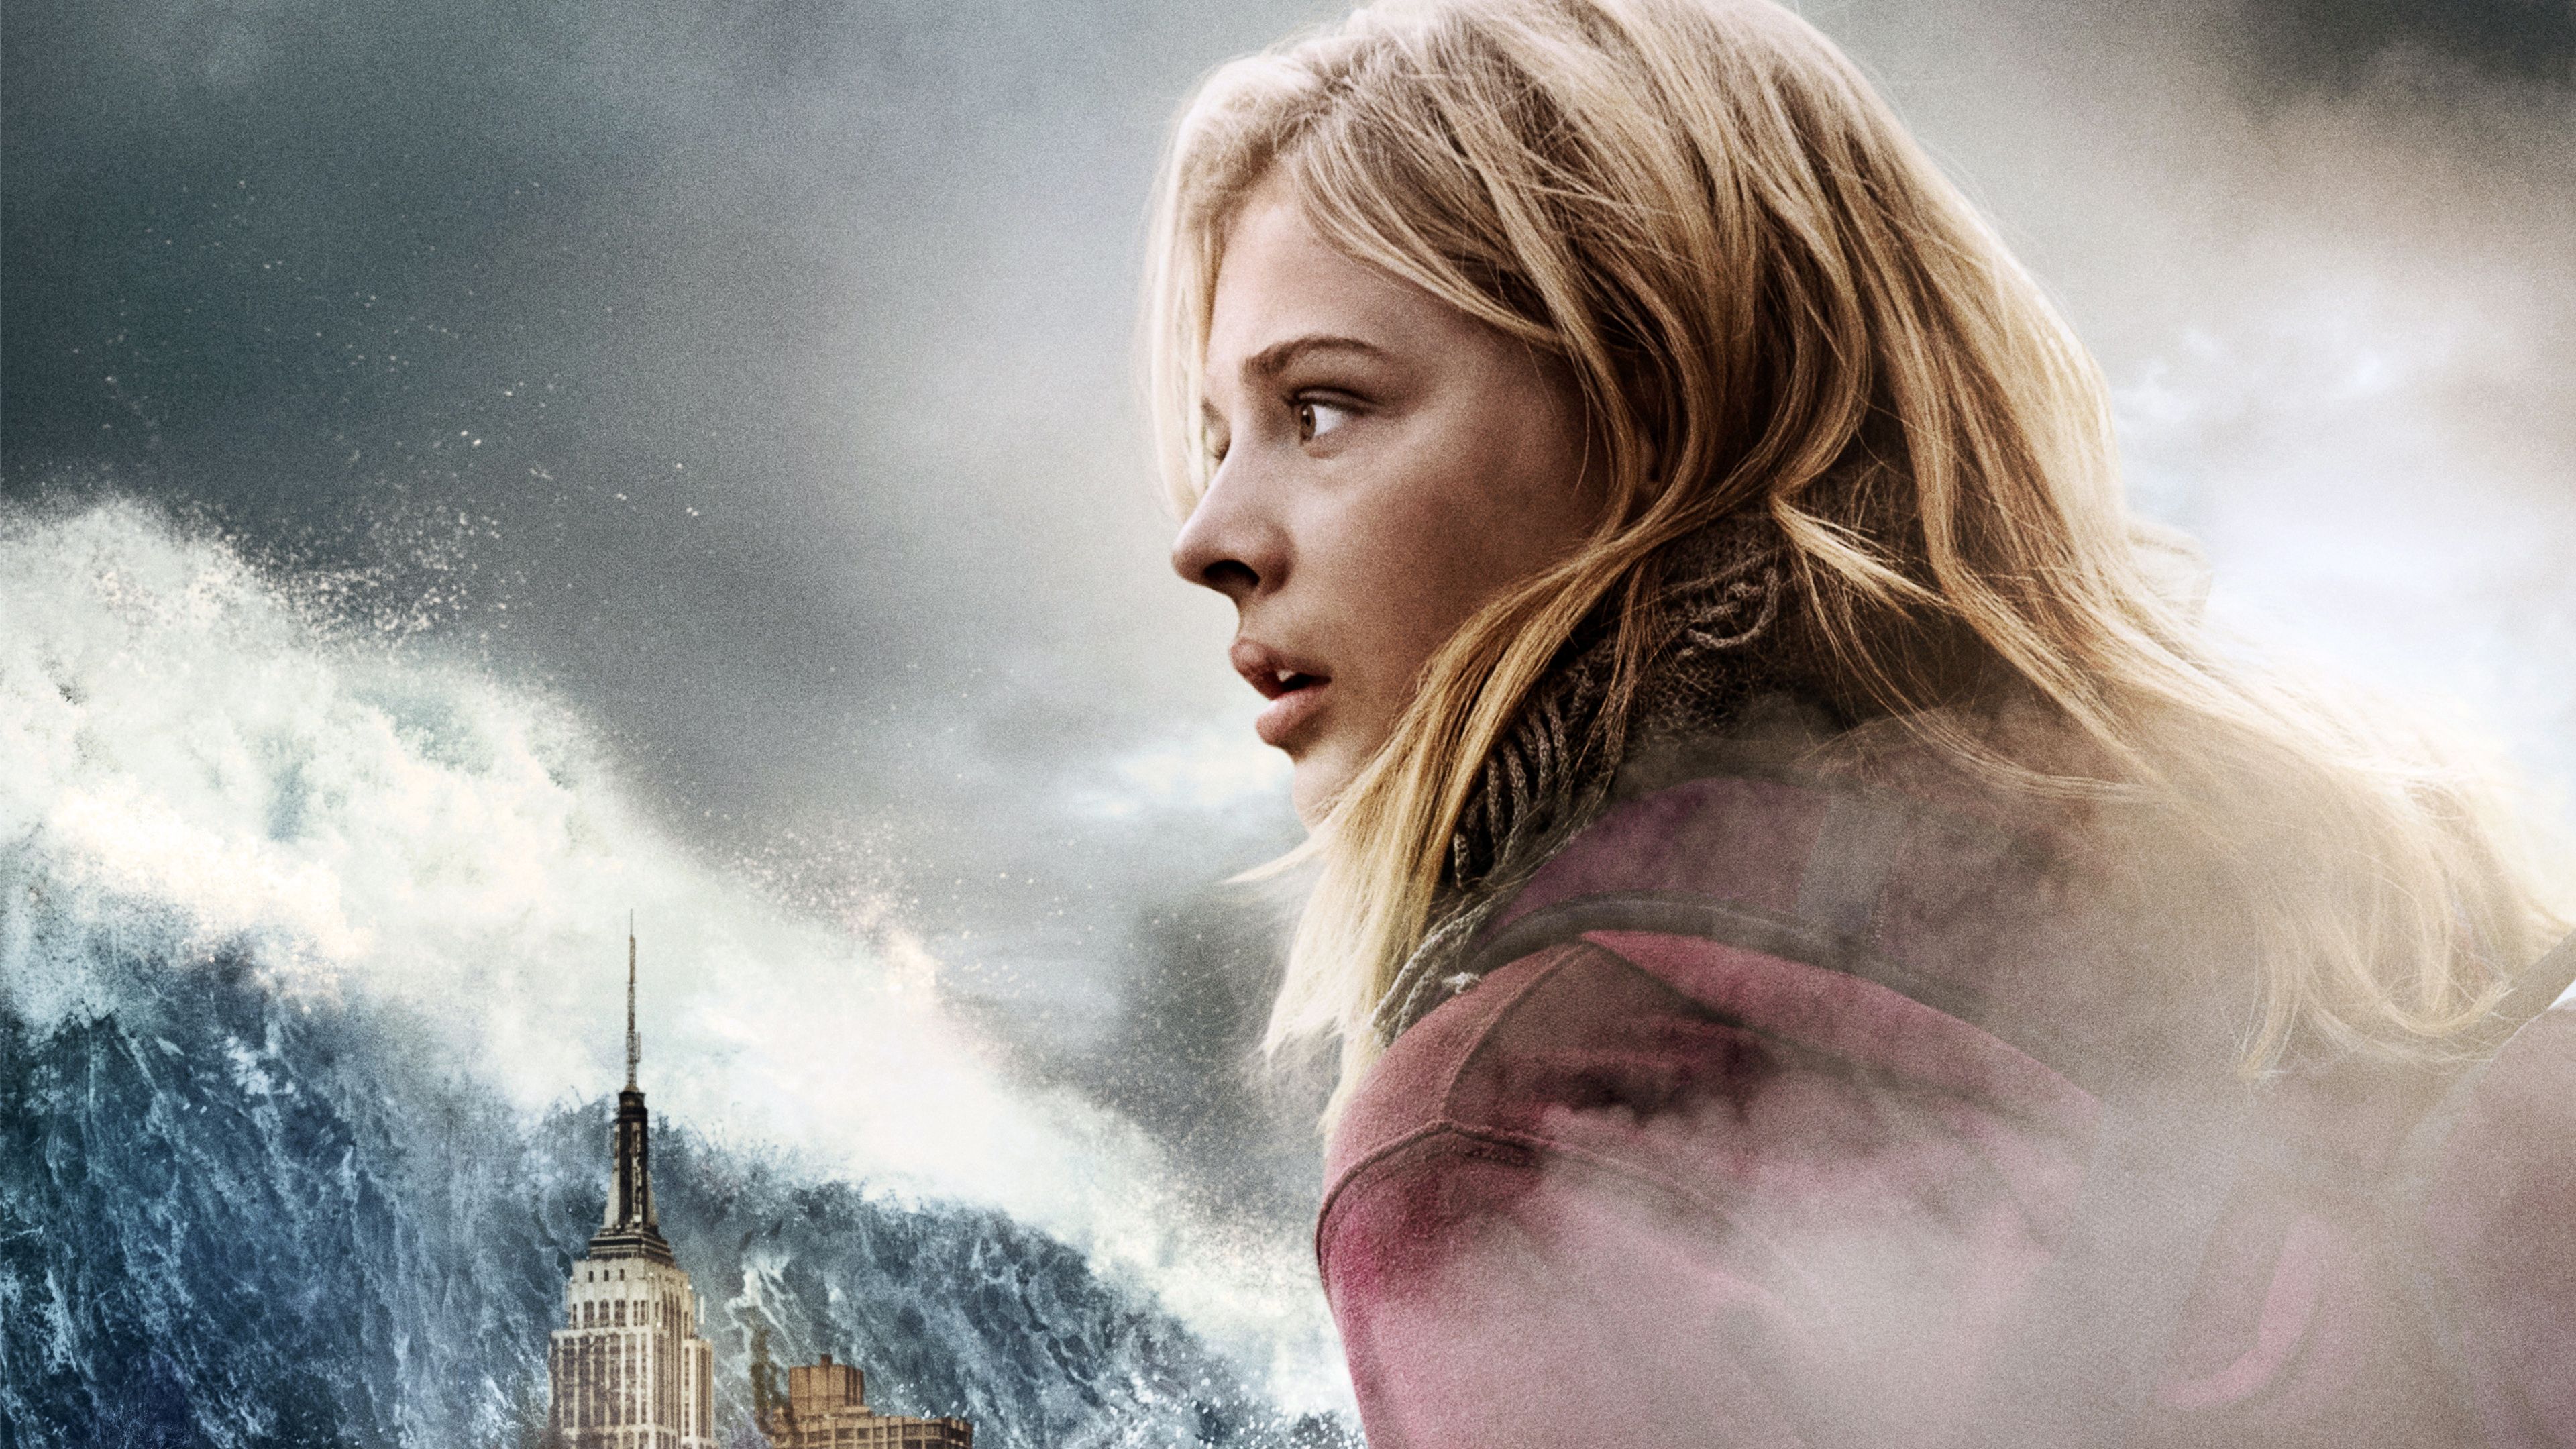 The 5th Wave Widescreen Wallpaper 48932 3840x2160px